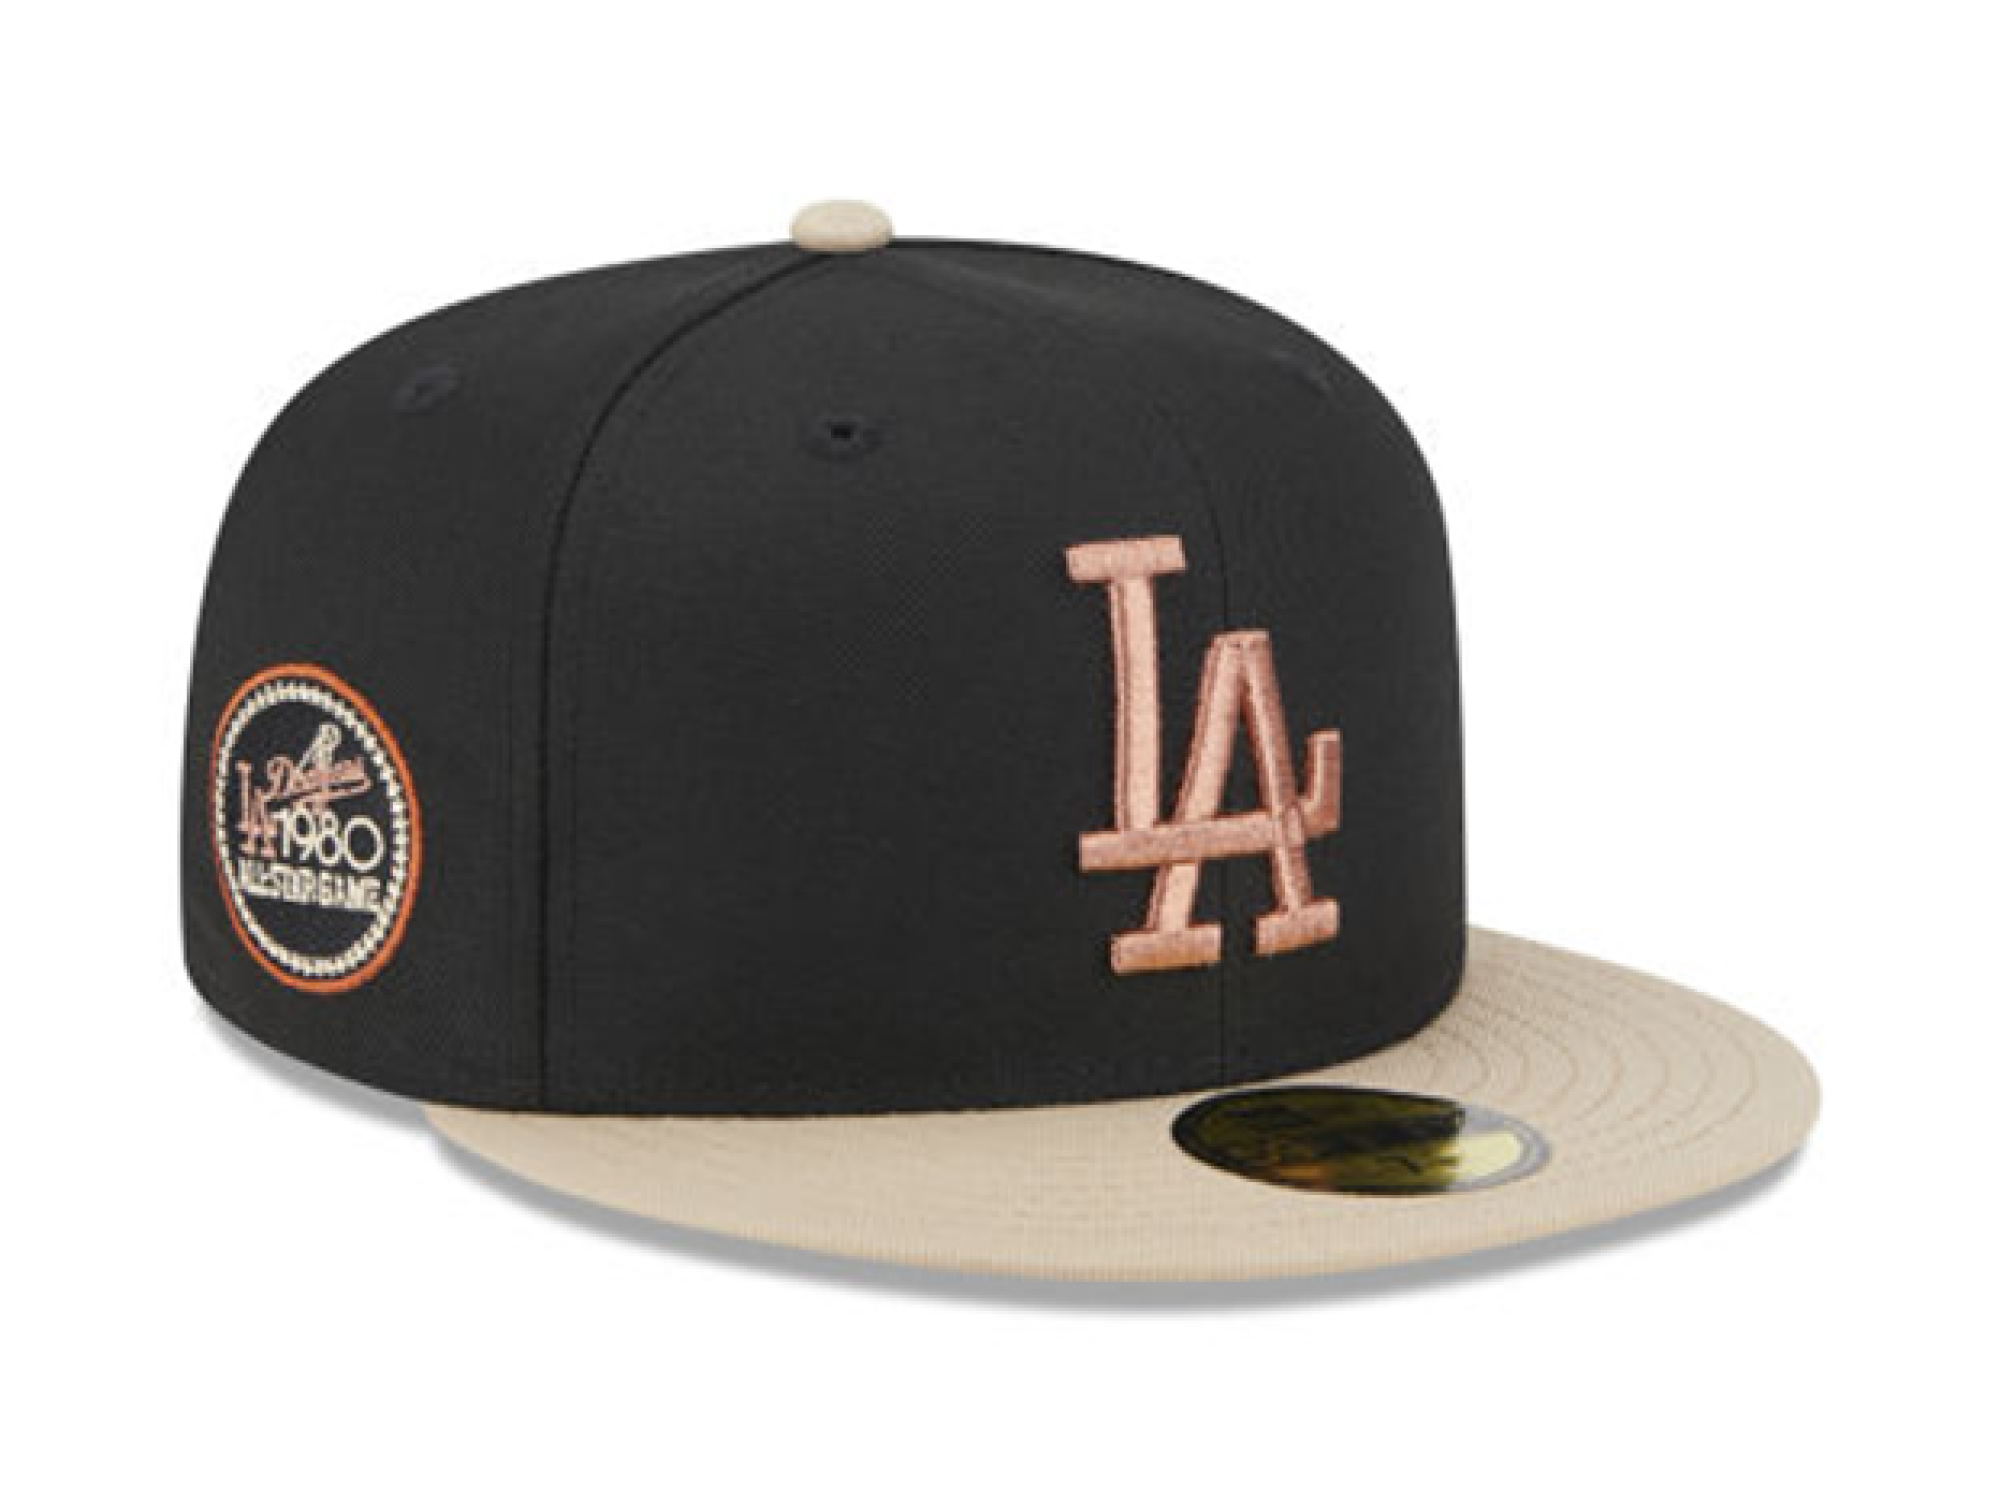 This "Rustbelt" design was the most popular Dodgers fashion hat in 2022.